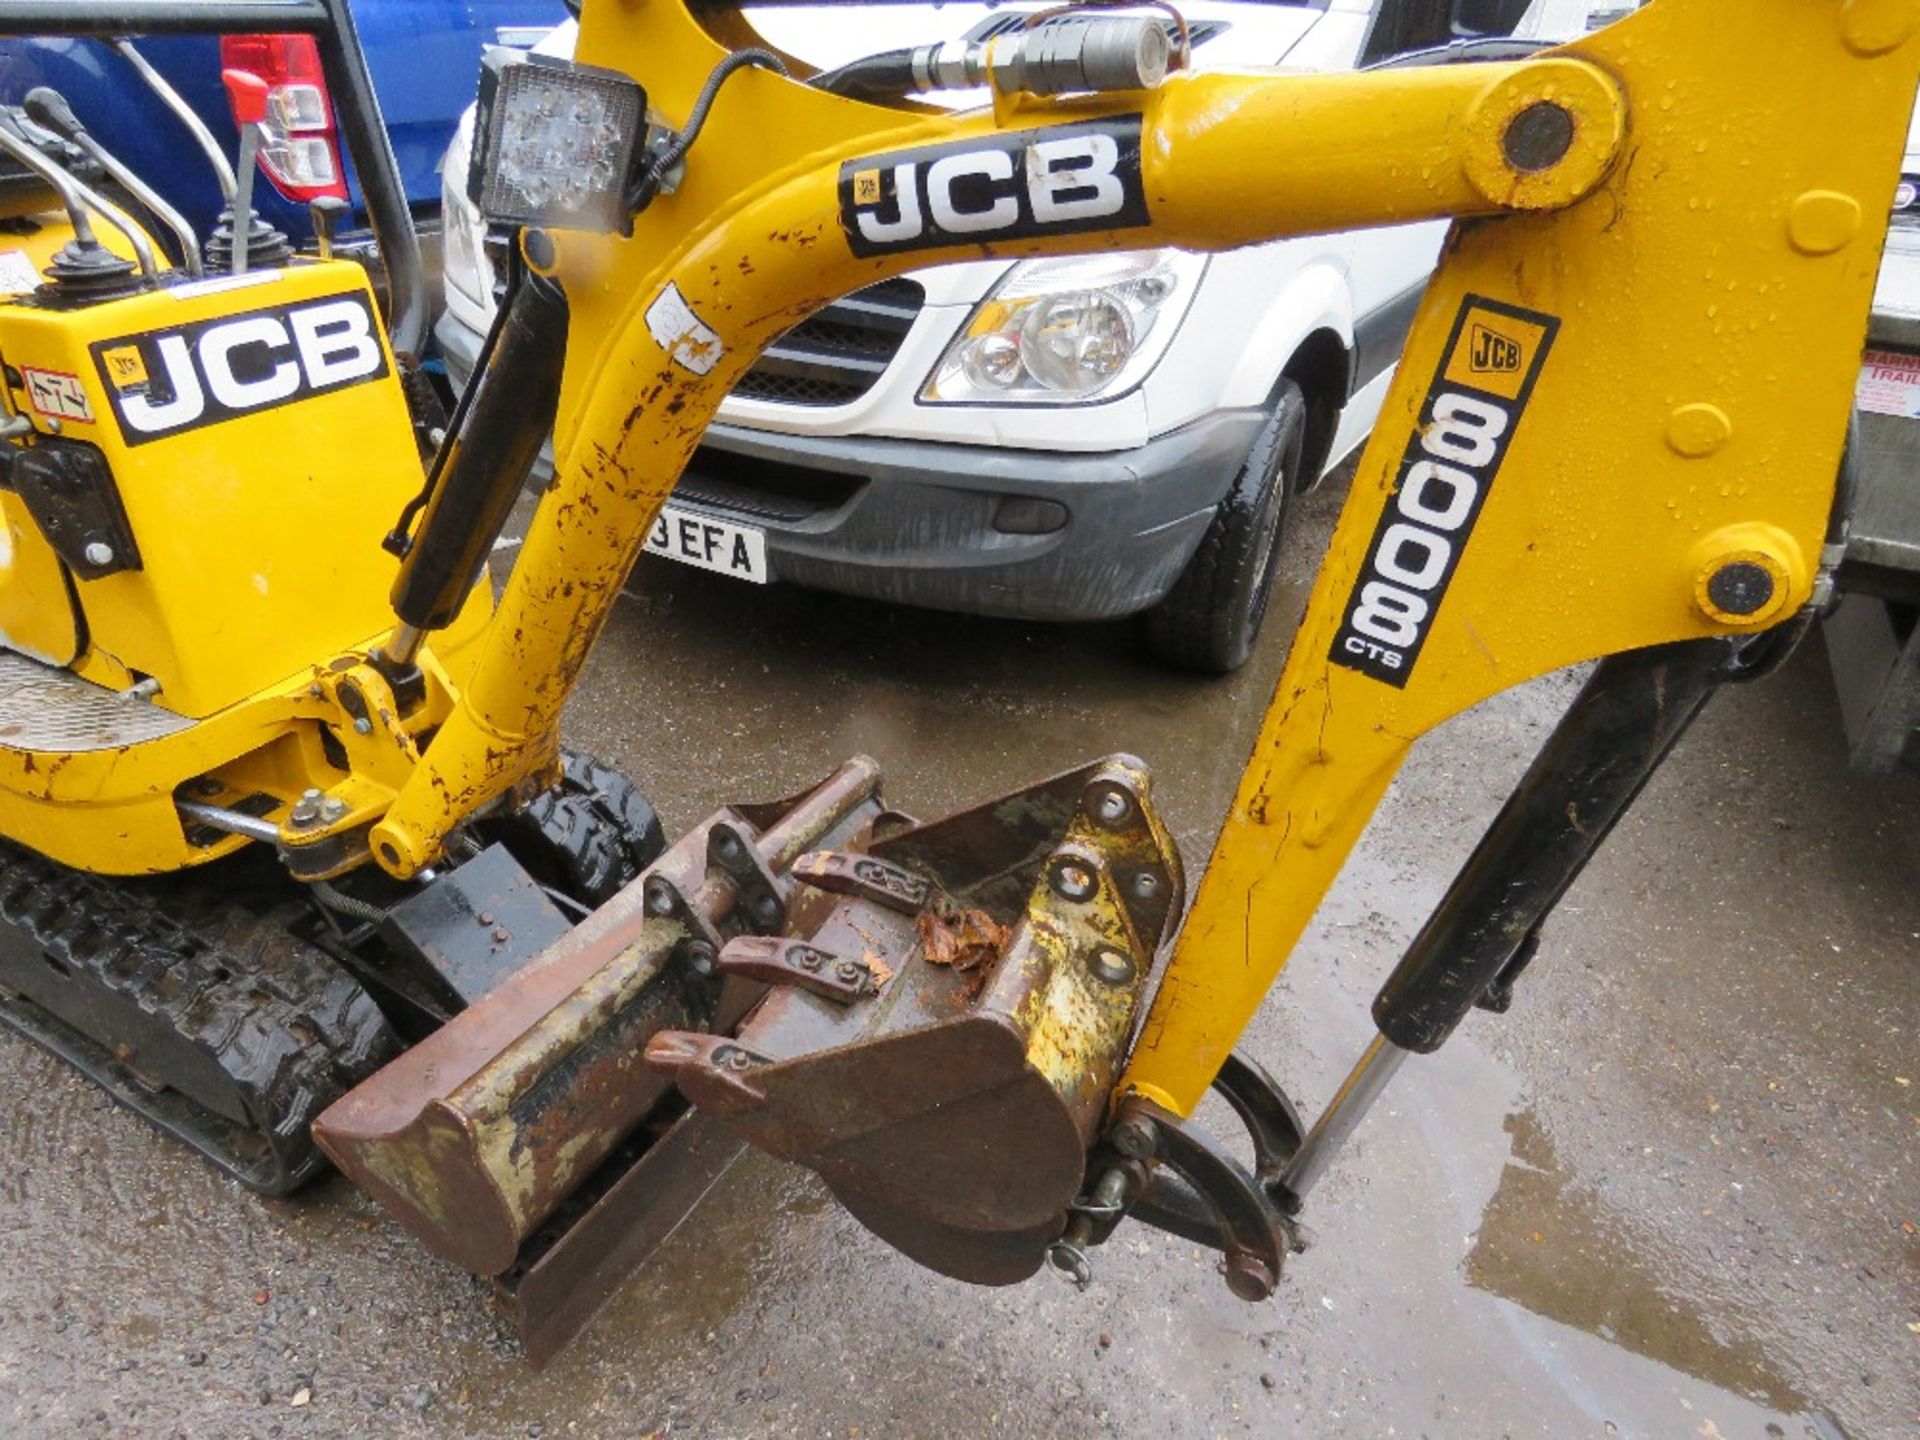 JCB 8008CTS MICRO EXCAVATOR YEAR 2019. 463 REC HOURS. 3 NO BUCKETS. needs some attention - Image 2 of 10